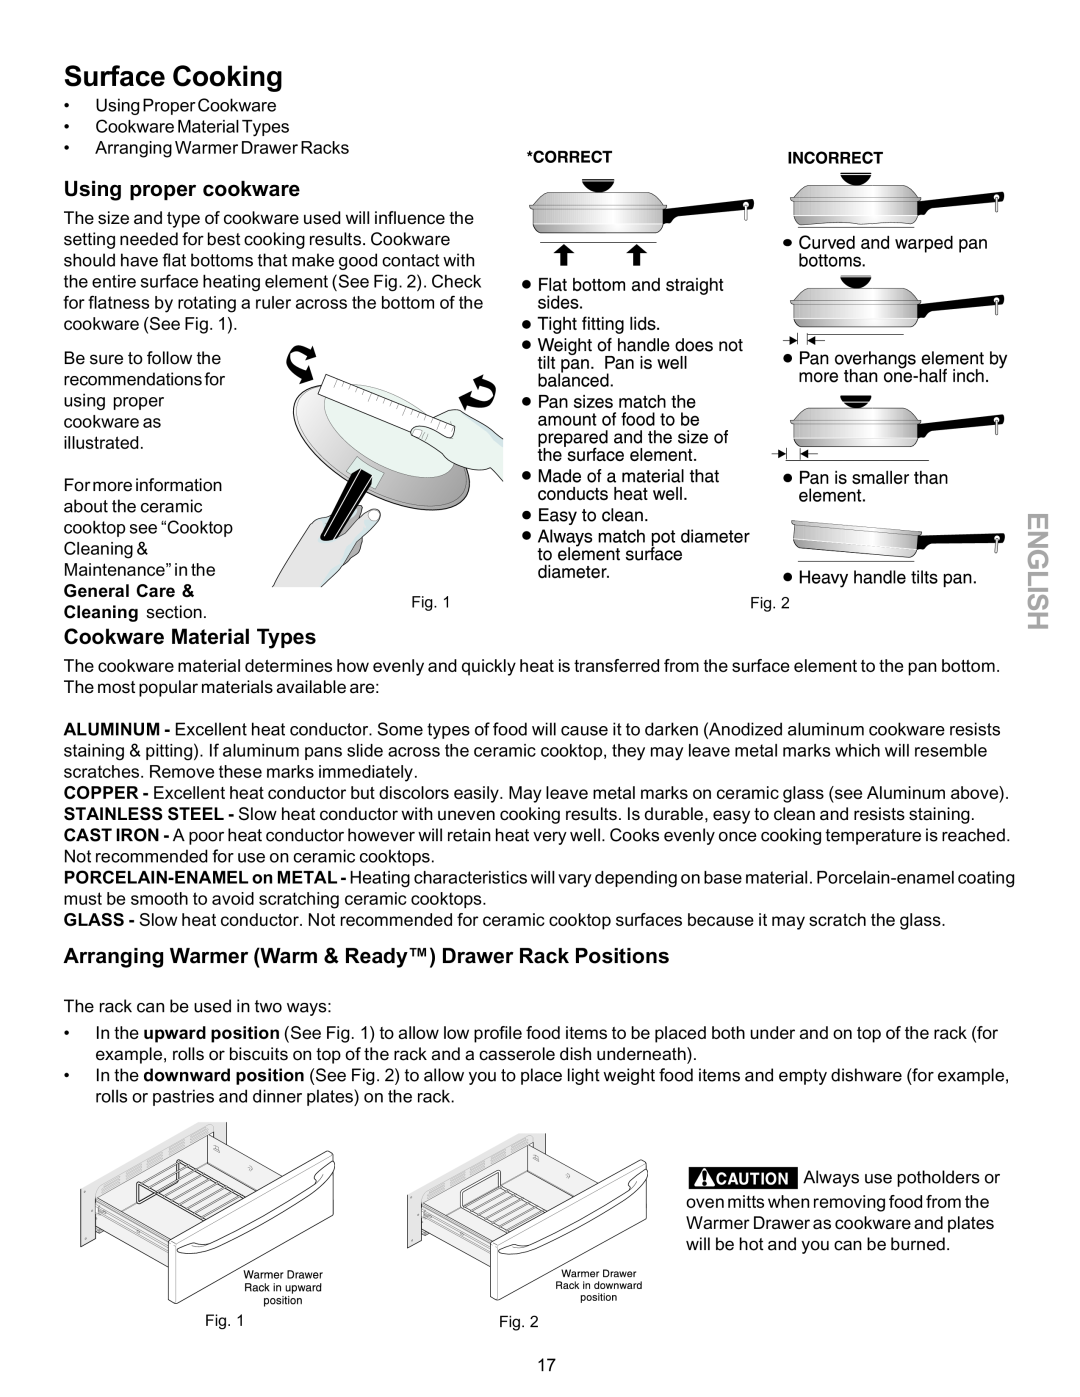 Kenmore 790-9663 manual Using proper cookware, Cookware Material Types, Arranging Warmer Warm & Ready Drawer Rack Positions 